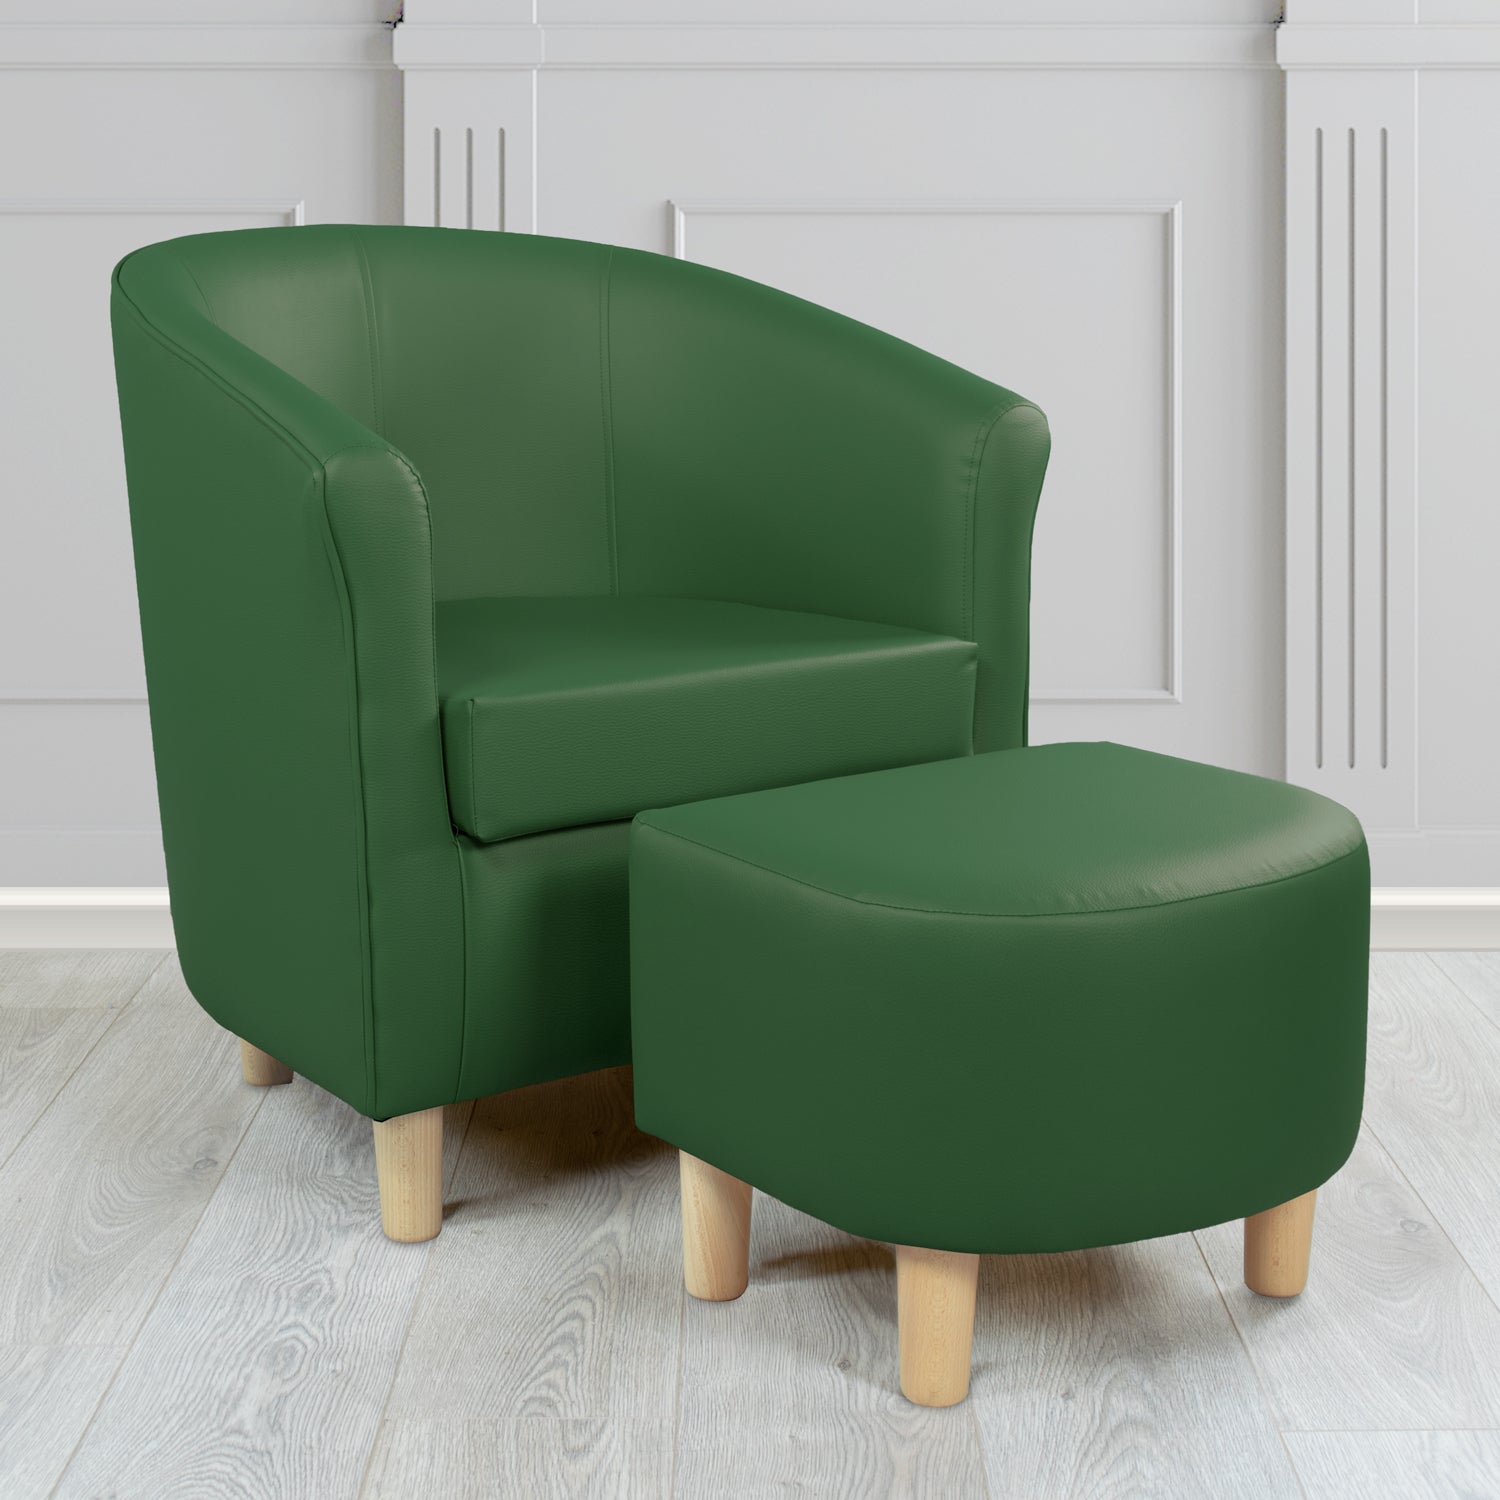 Tuscany Just Colour Rainforest Faux Leather Tub Chair with Footstool Set - The Tub Chair Shop